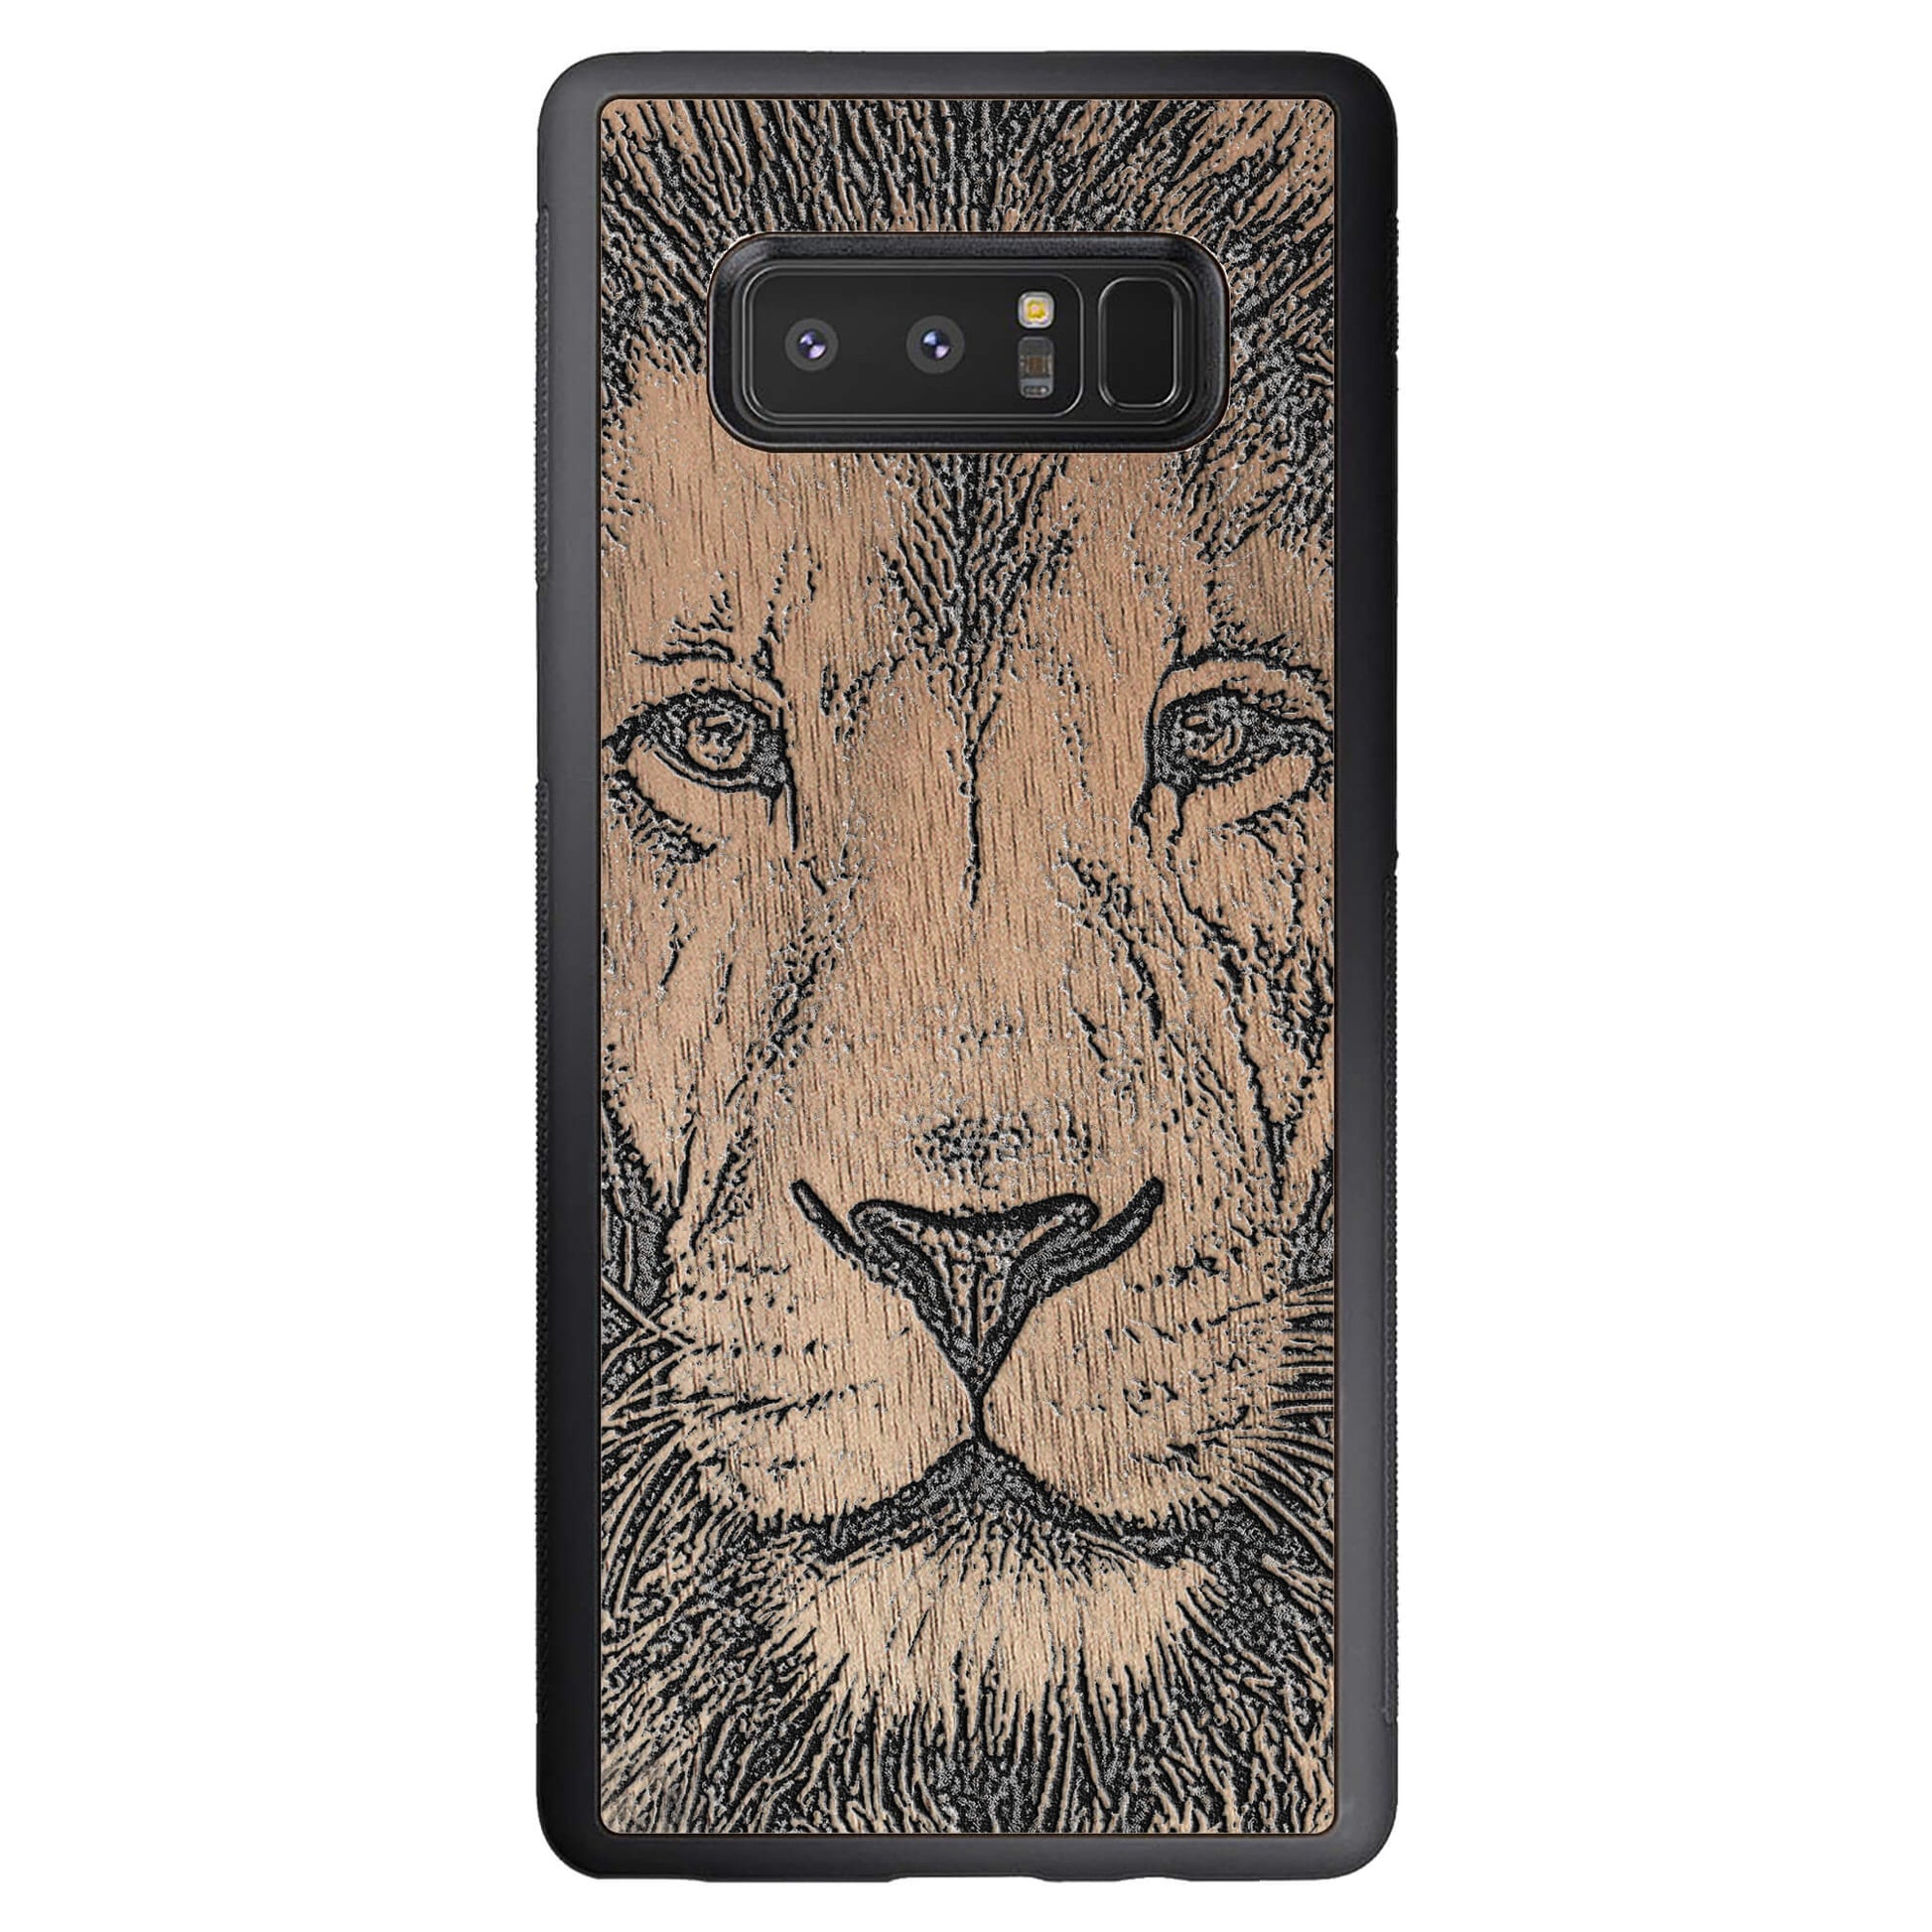 Wooden Case for Samsung Galaxy Note 8 Lion face